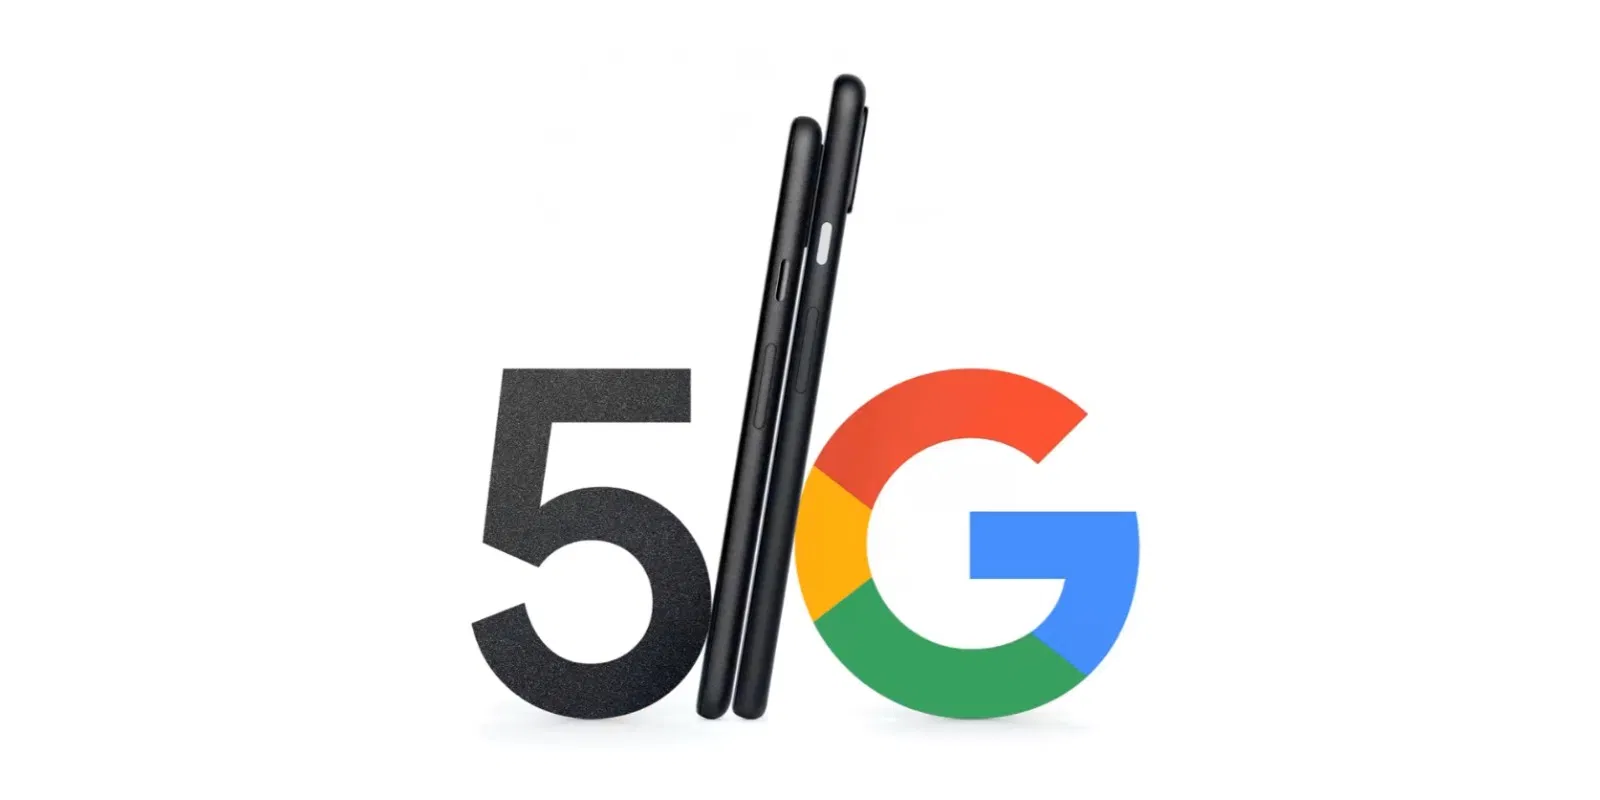 Google Pixel 5 and 4A 5G